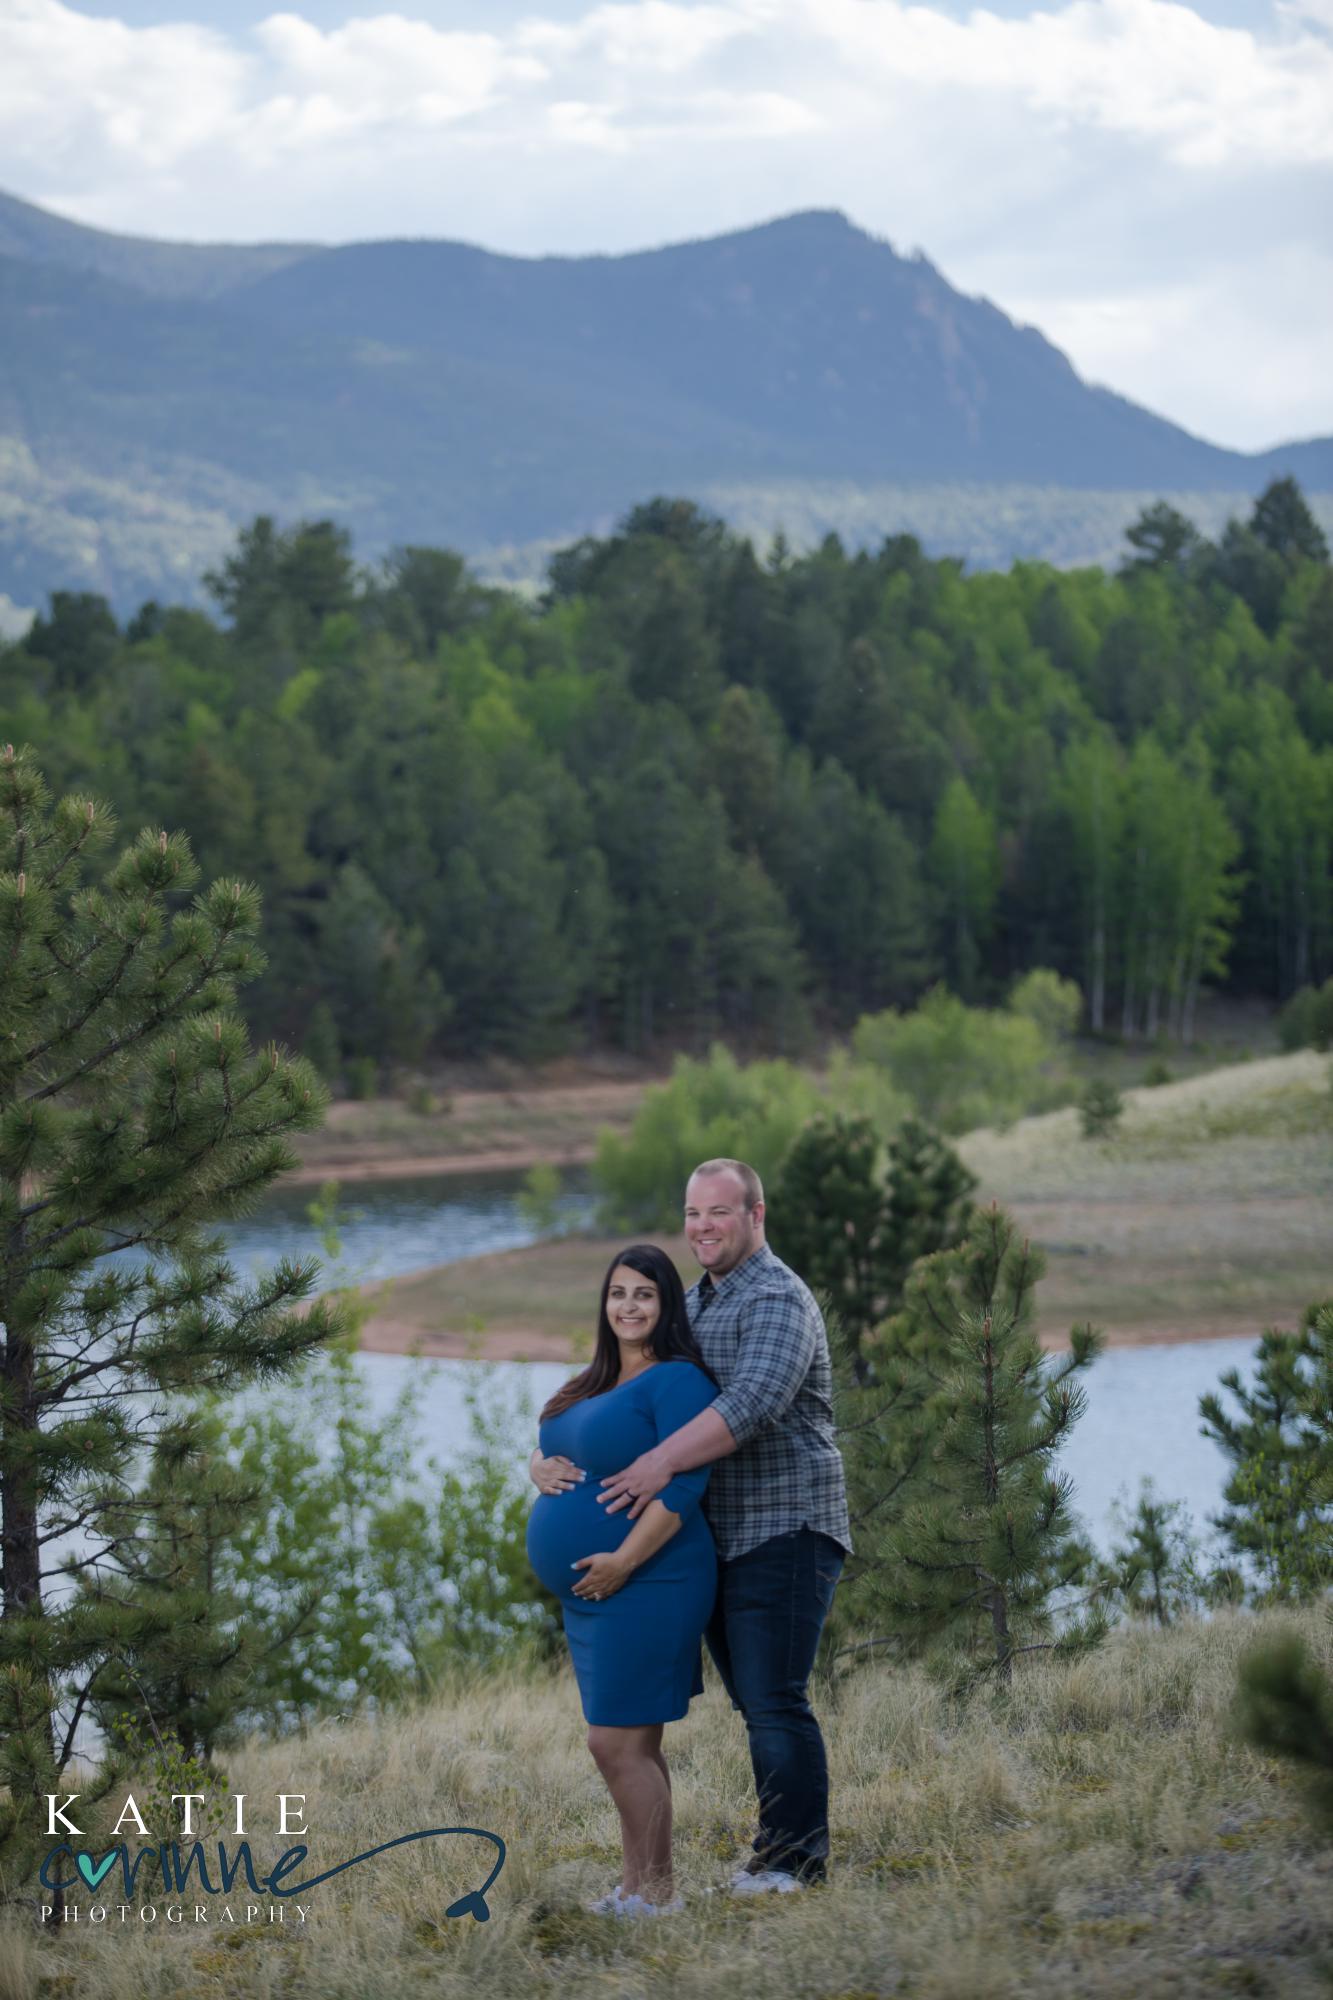 Colorado springs couple poses for maternity session